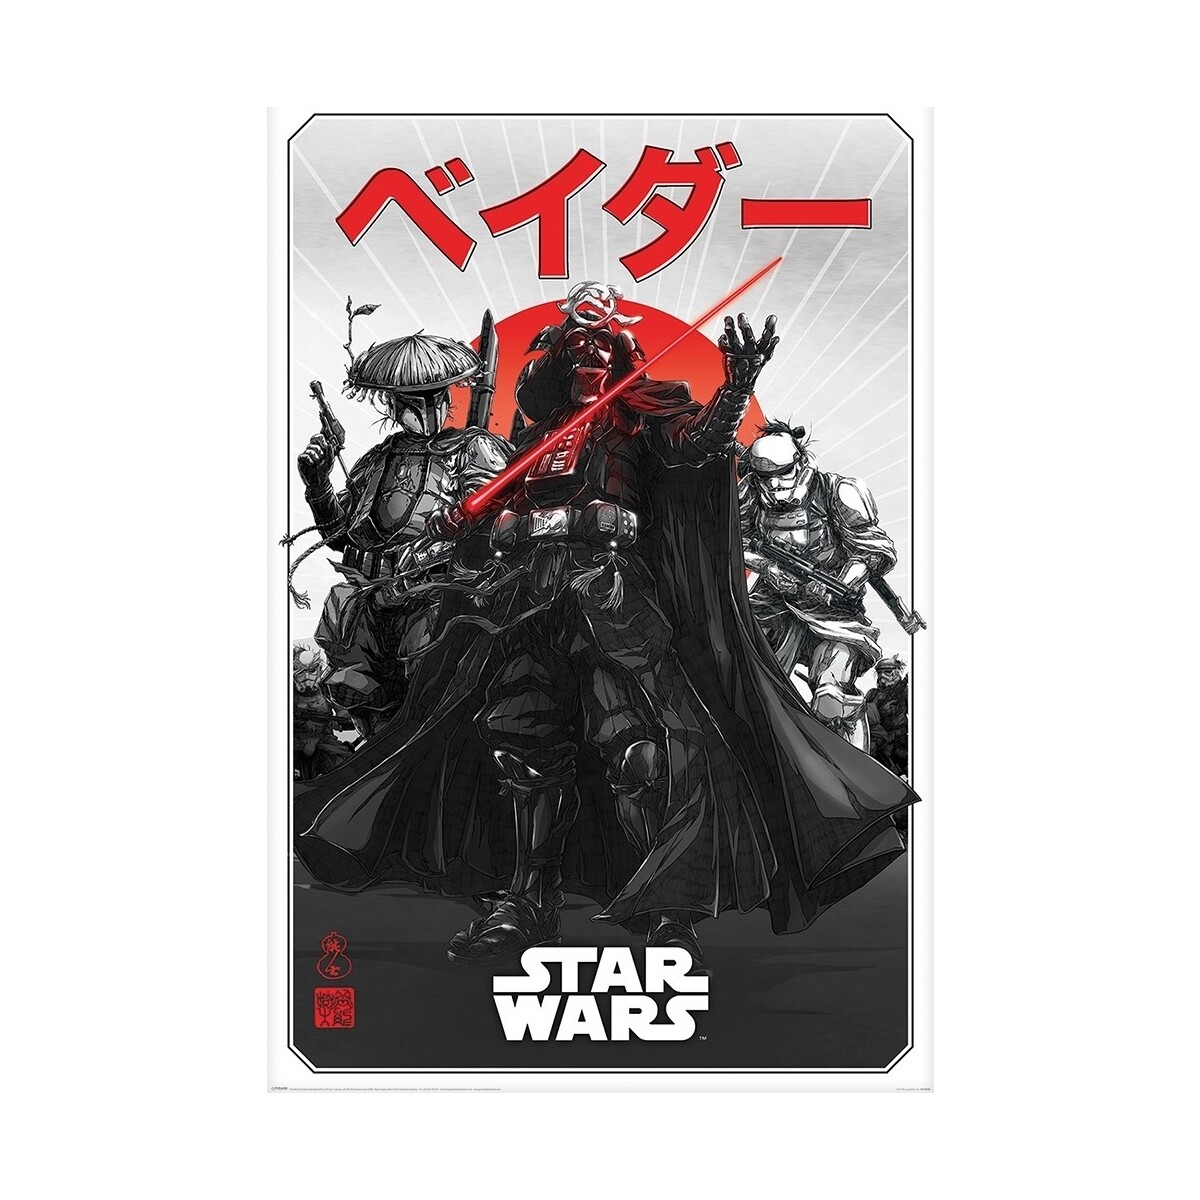 Casa Afiches / posters Star Wars: Visions PM3179 Negro